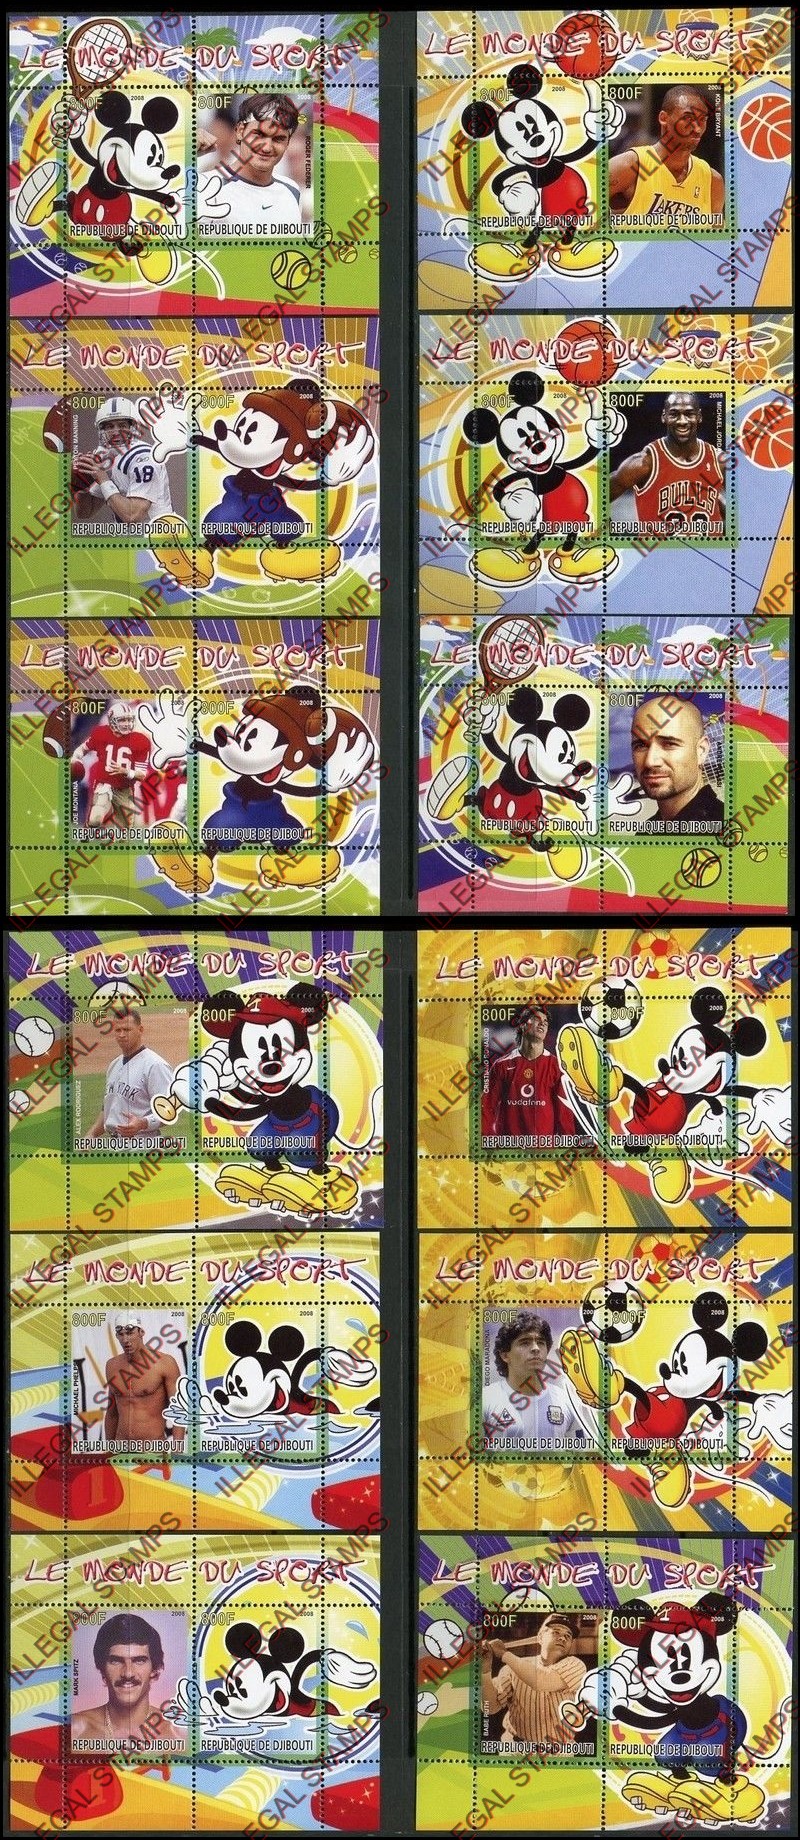 Djibouti 2008 The World of Sports with Mickey Mouse Illegal Stamp Souvenir Sheets of 2